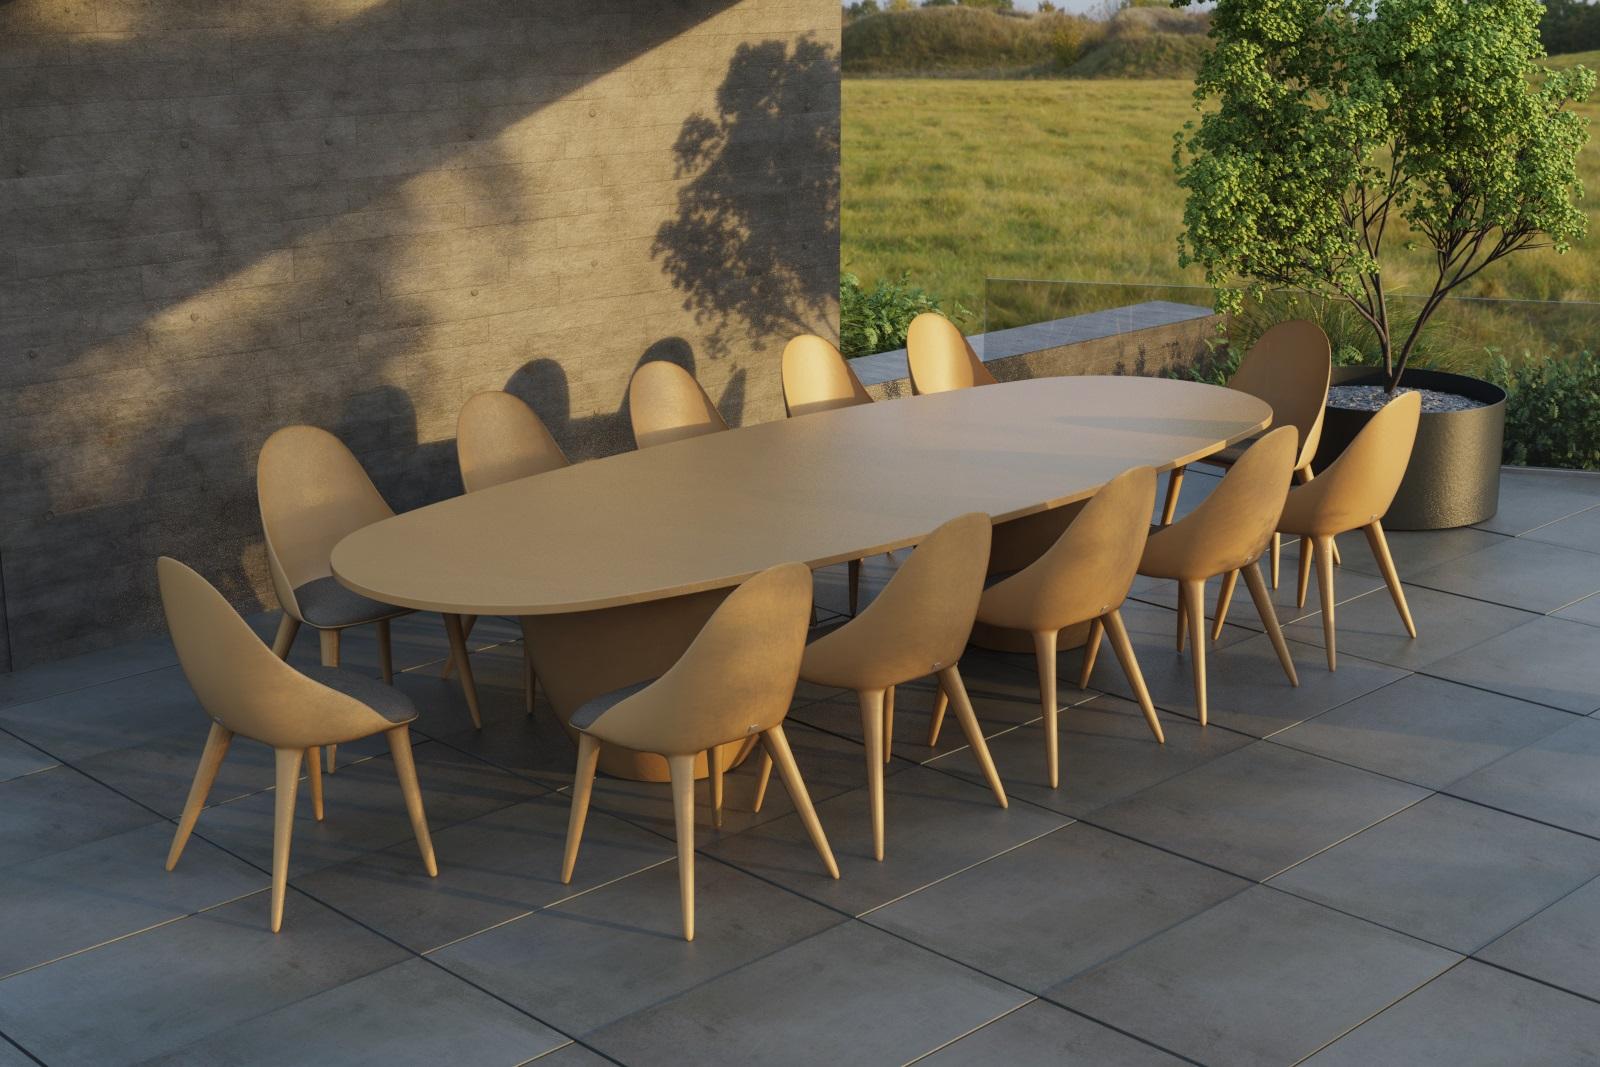 10-12 person outdoor dining table